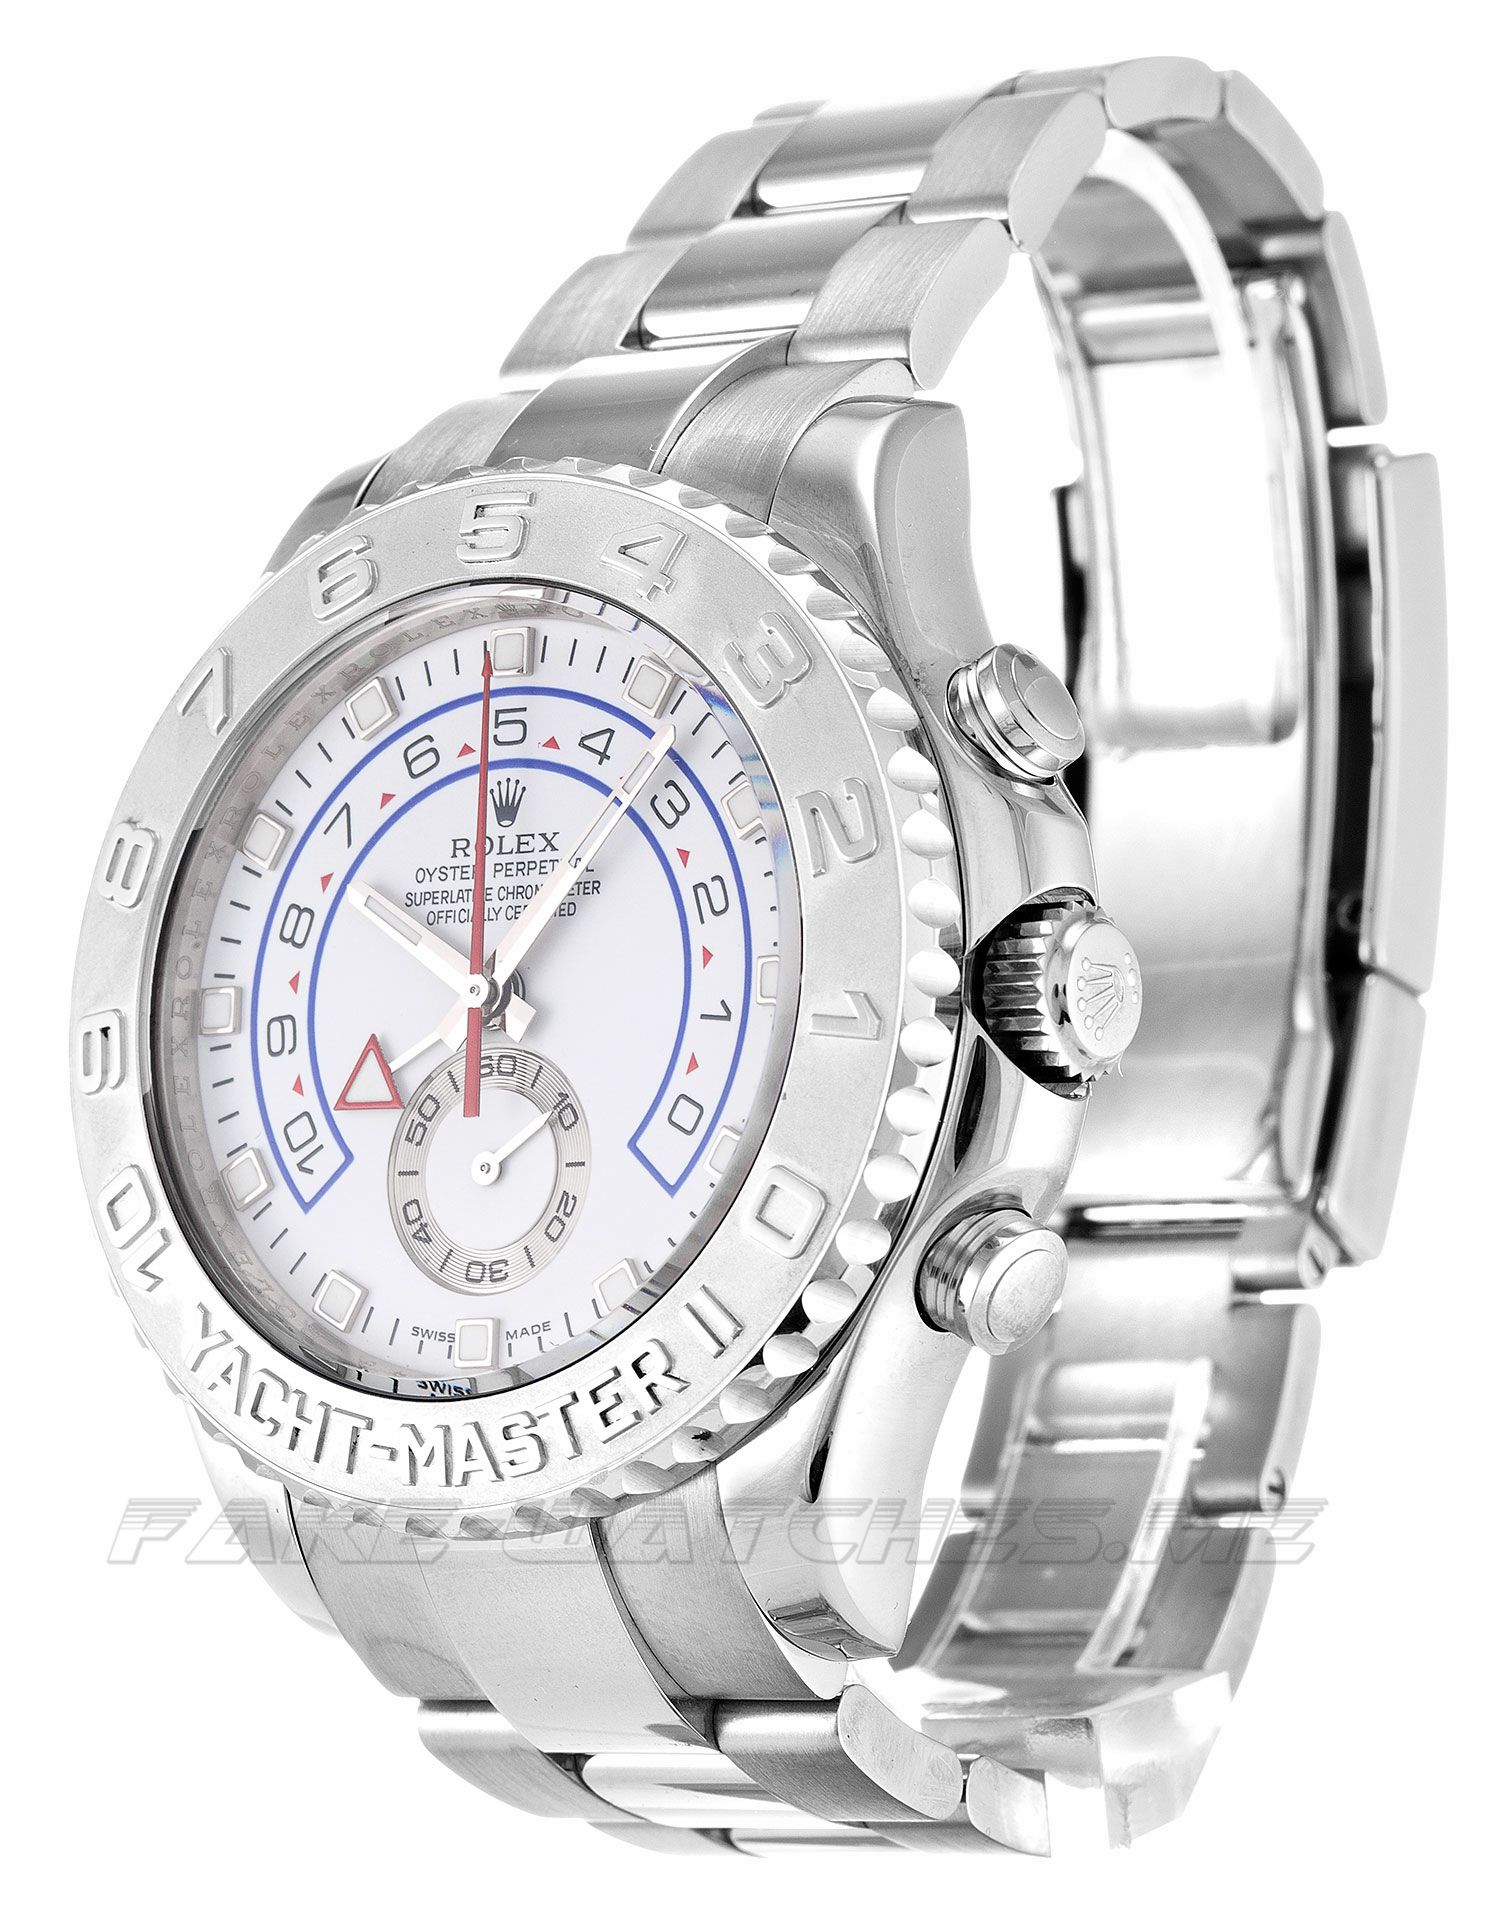 Rolex Yacht Master II Mens Automatic 116689